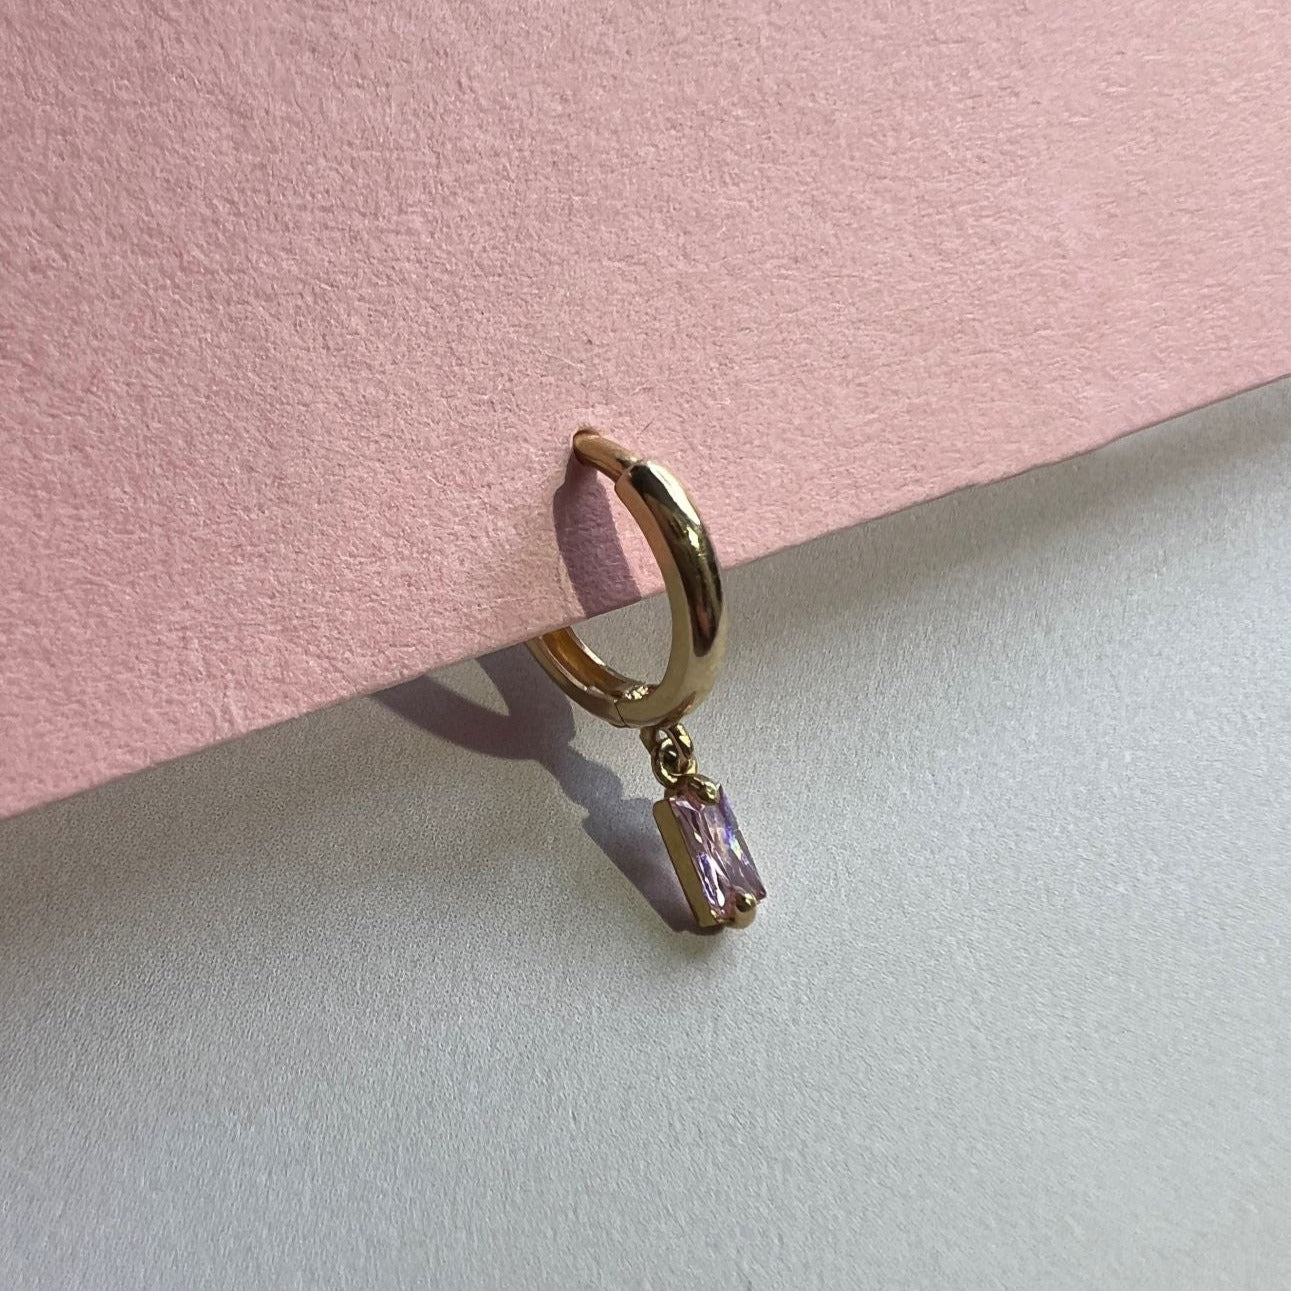 EARRING "SIMPLE THING" WITH PINK CZ / SOLID GOLD